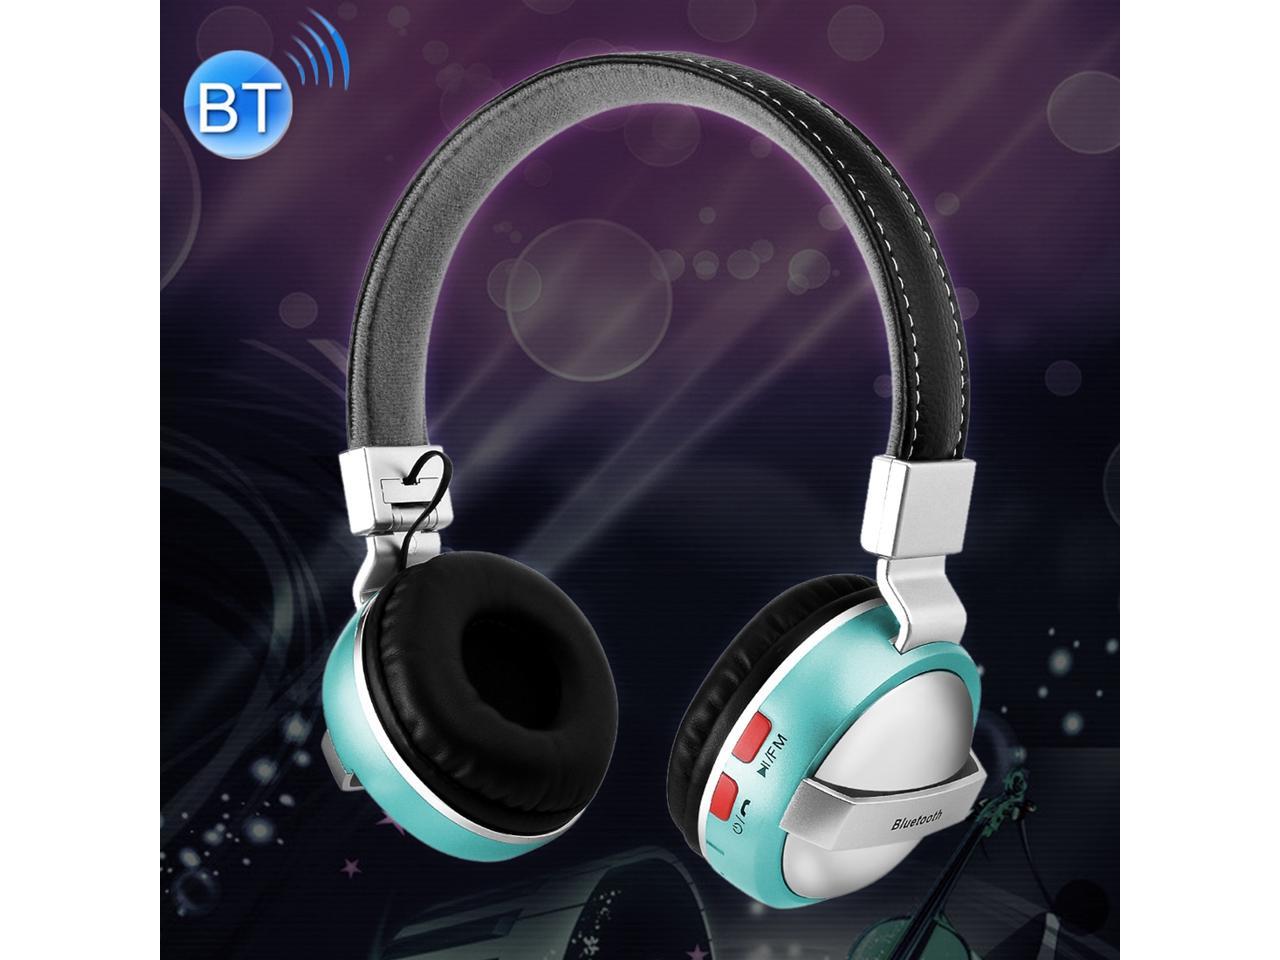 BTH-868 Stereo Sound Quality V4.2 Bluetooth Headphone, Bluetooth Distance: 10m, Support 3.5mm Audio Input & FM, for iPhone, Samsung, HTC, Sony and other Smartphones (green)